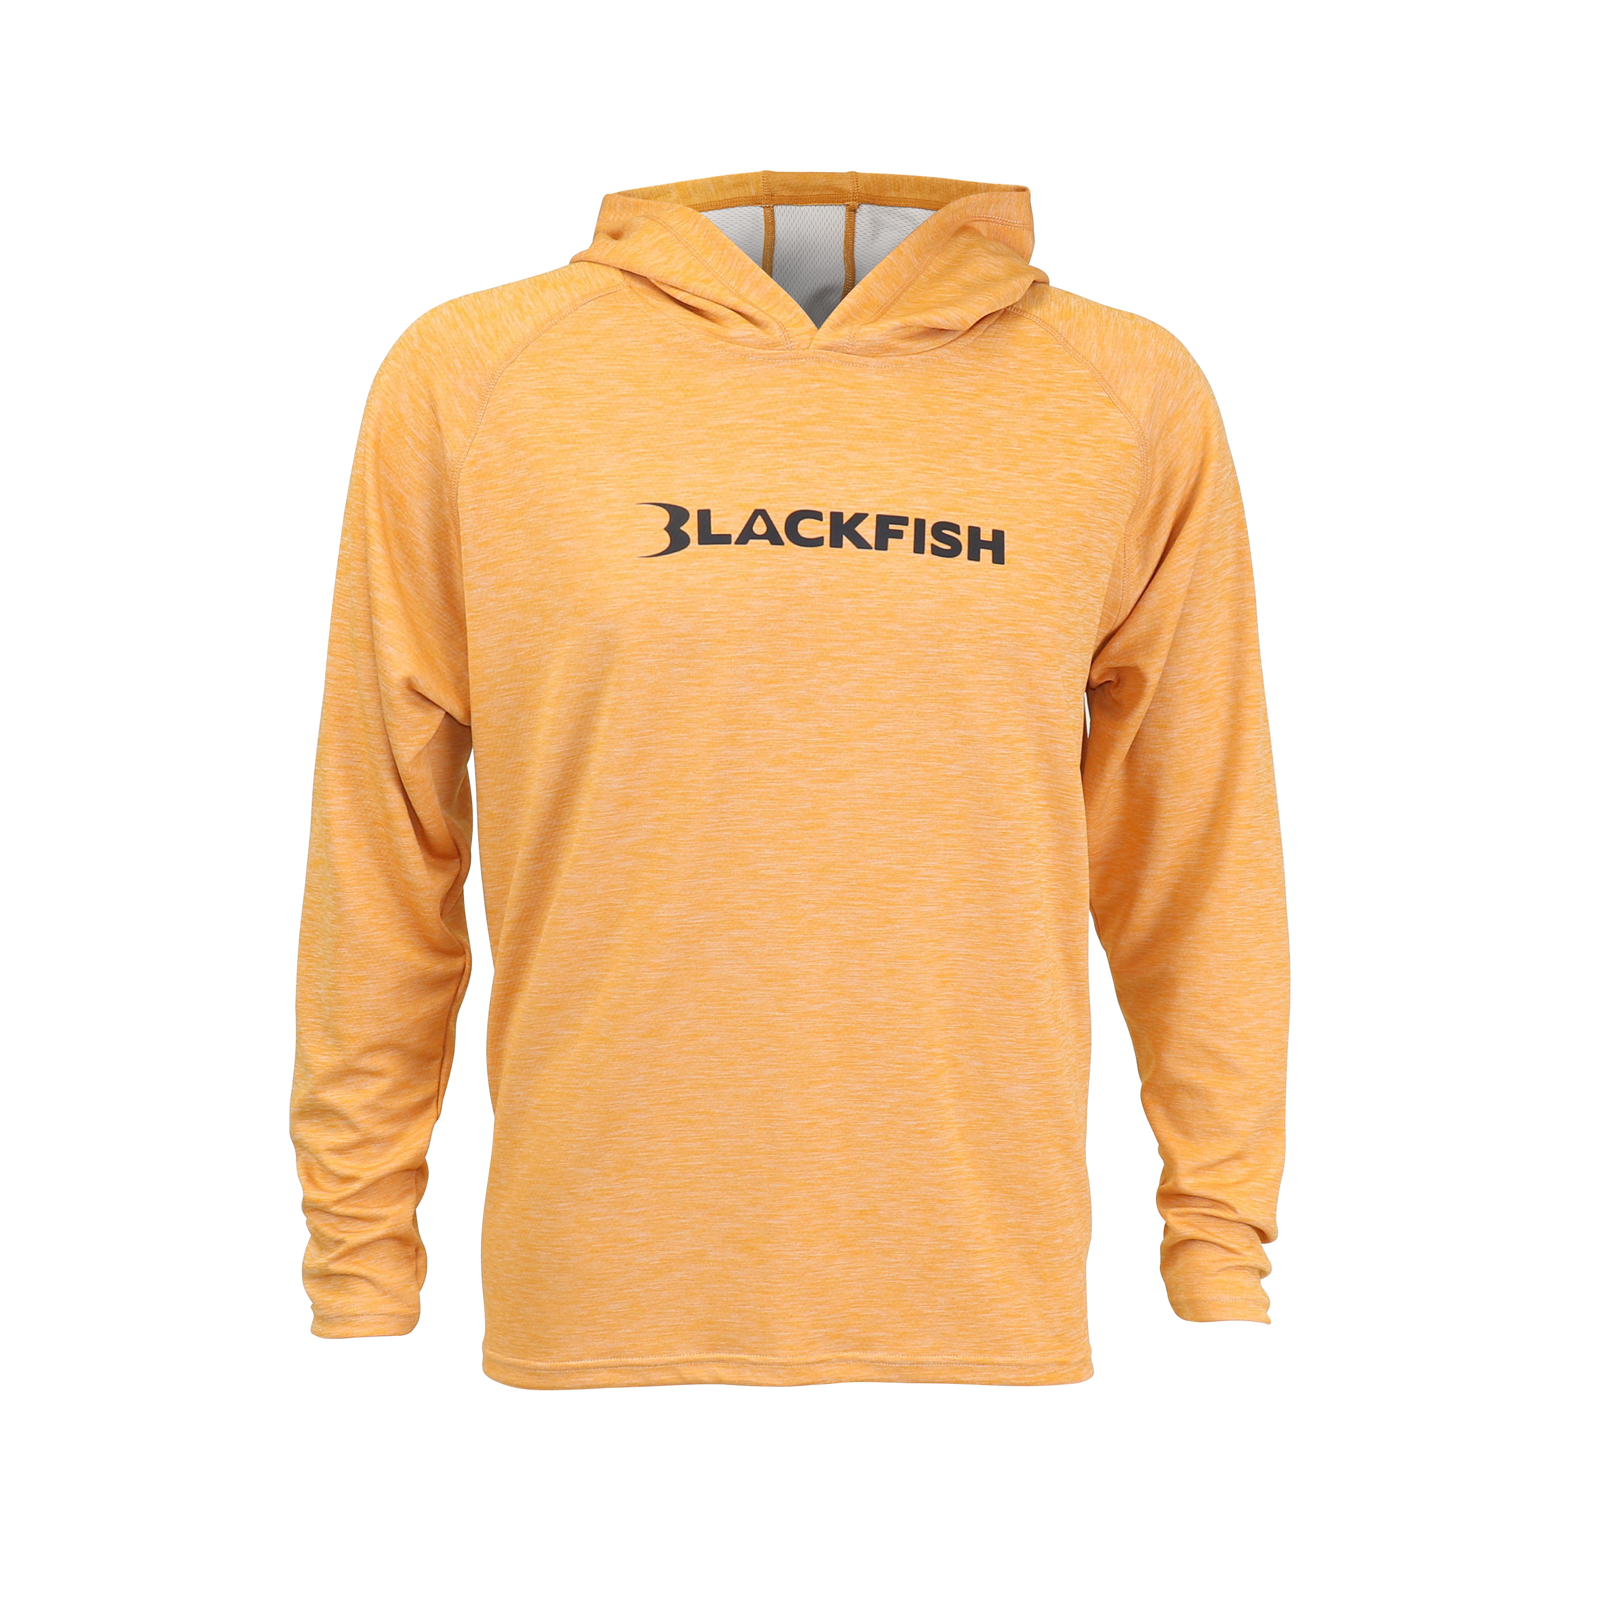 New UPF colors and products from Blackfish Gear now available